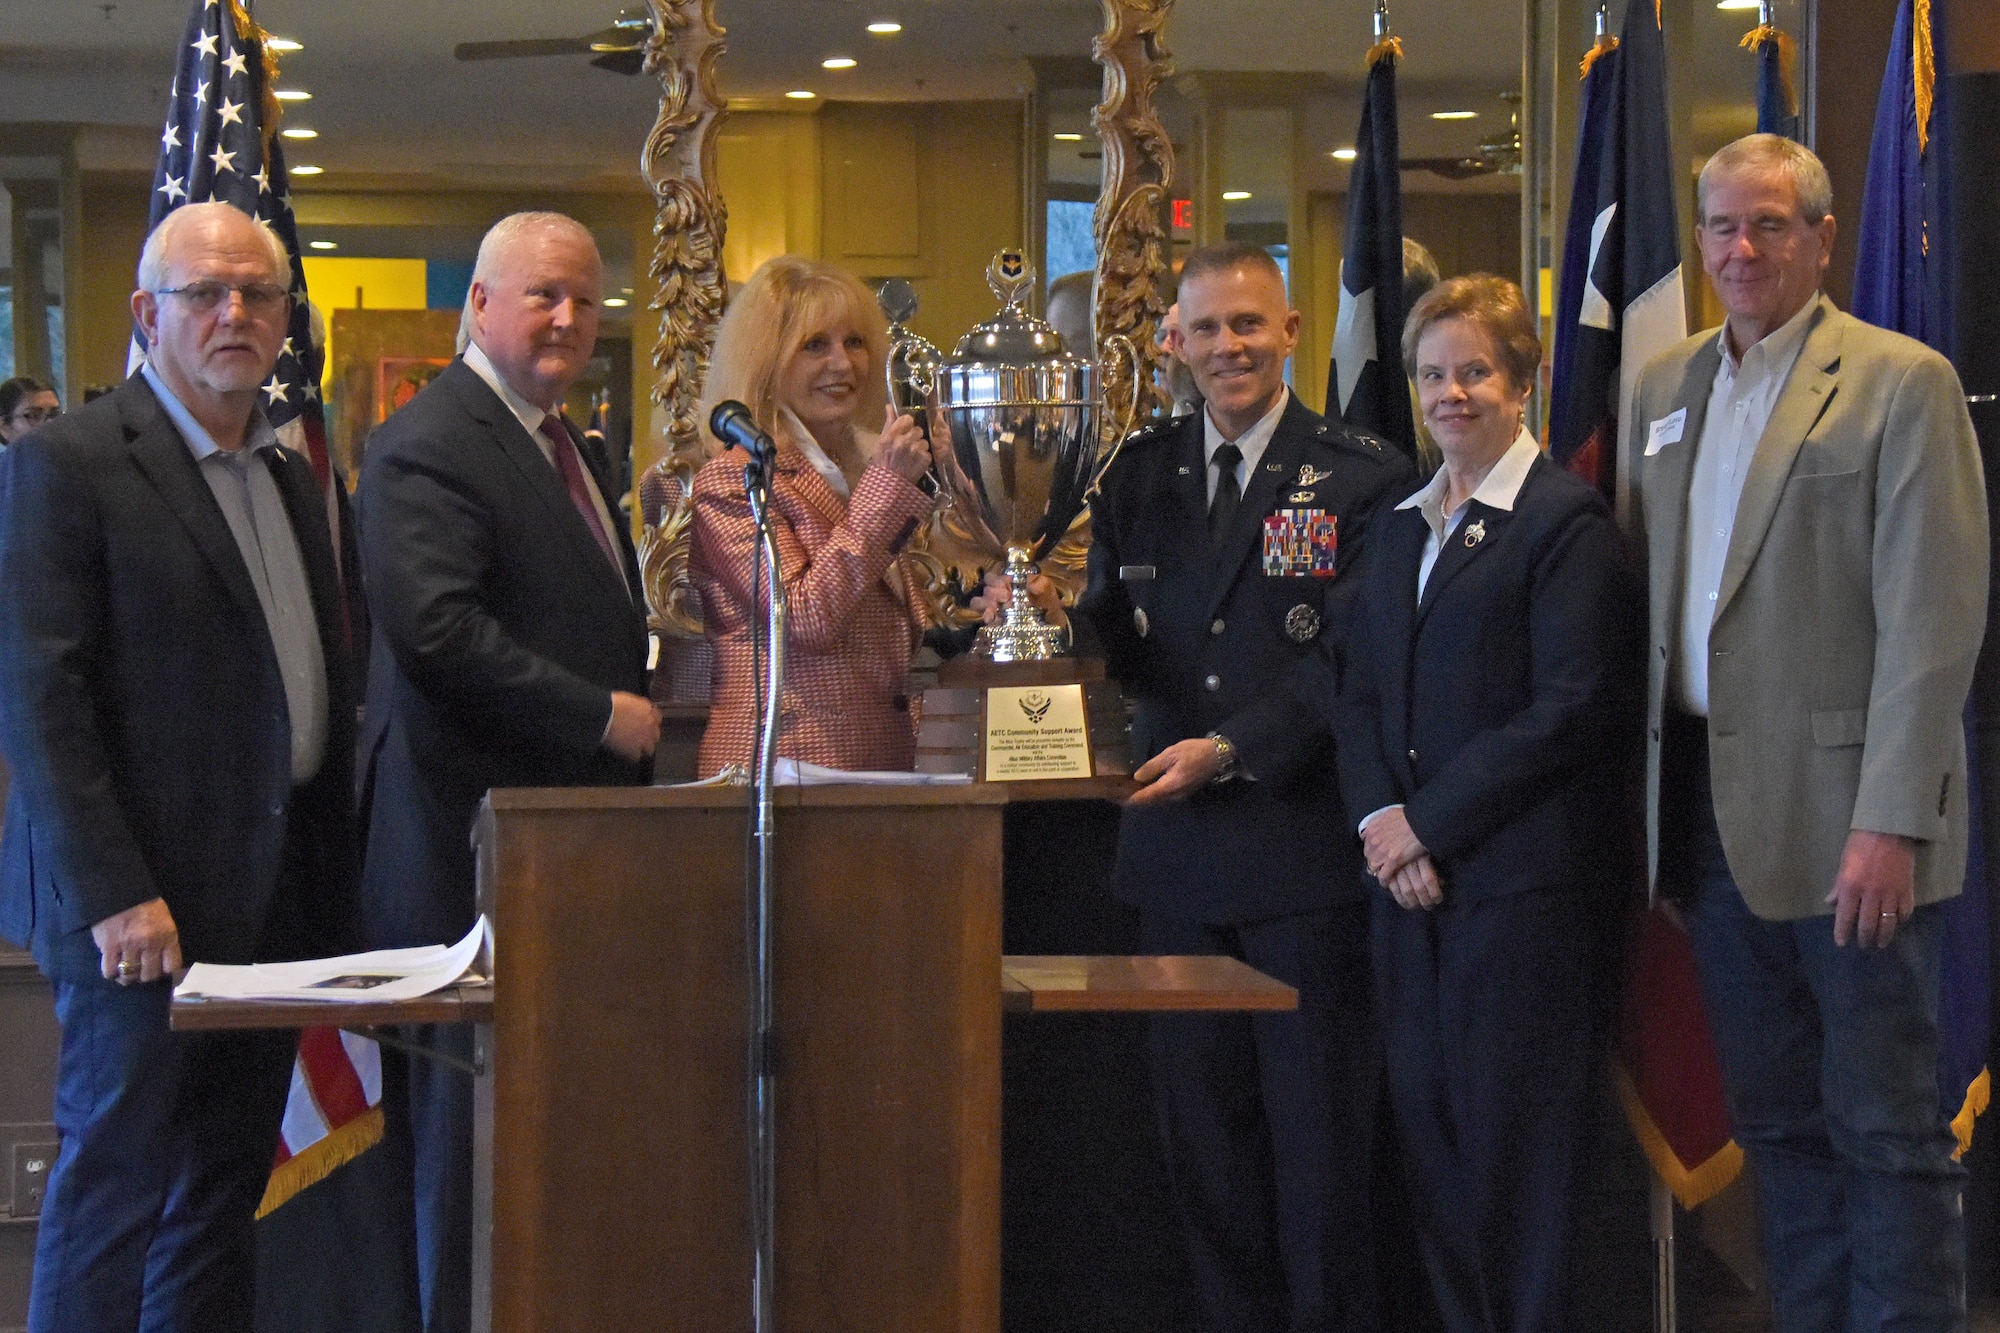 San Angelo Mayor Brenda Gunter, joined by San Angelo civic leaders, receives the Air Education and Training Command Altus Trophy from U.S. Air Force Lt. Gen. Steve Kwast, commander of AETC, at the dinner for San Angelo and Goofellow leaders at the Riverview Restaurant in San Angelo, Texas, March 20, 2019. The Altus Trophy is presented annually to the community with the strongest ties to their AETC base. (U.S. Air Force photo by Senior Airman Seraiah Hines/Released)